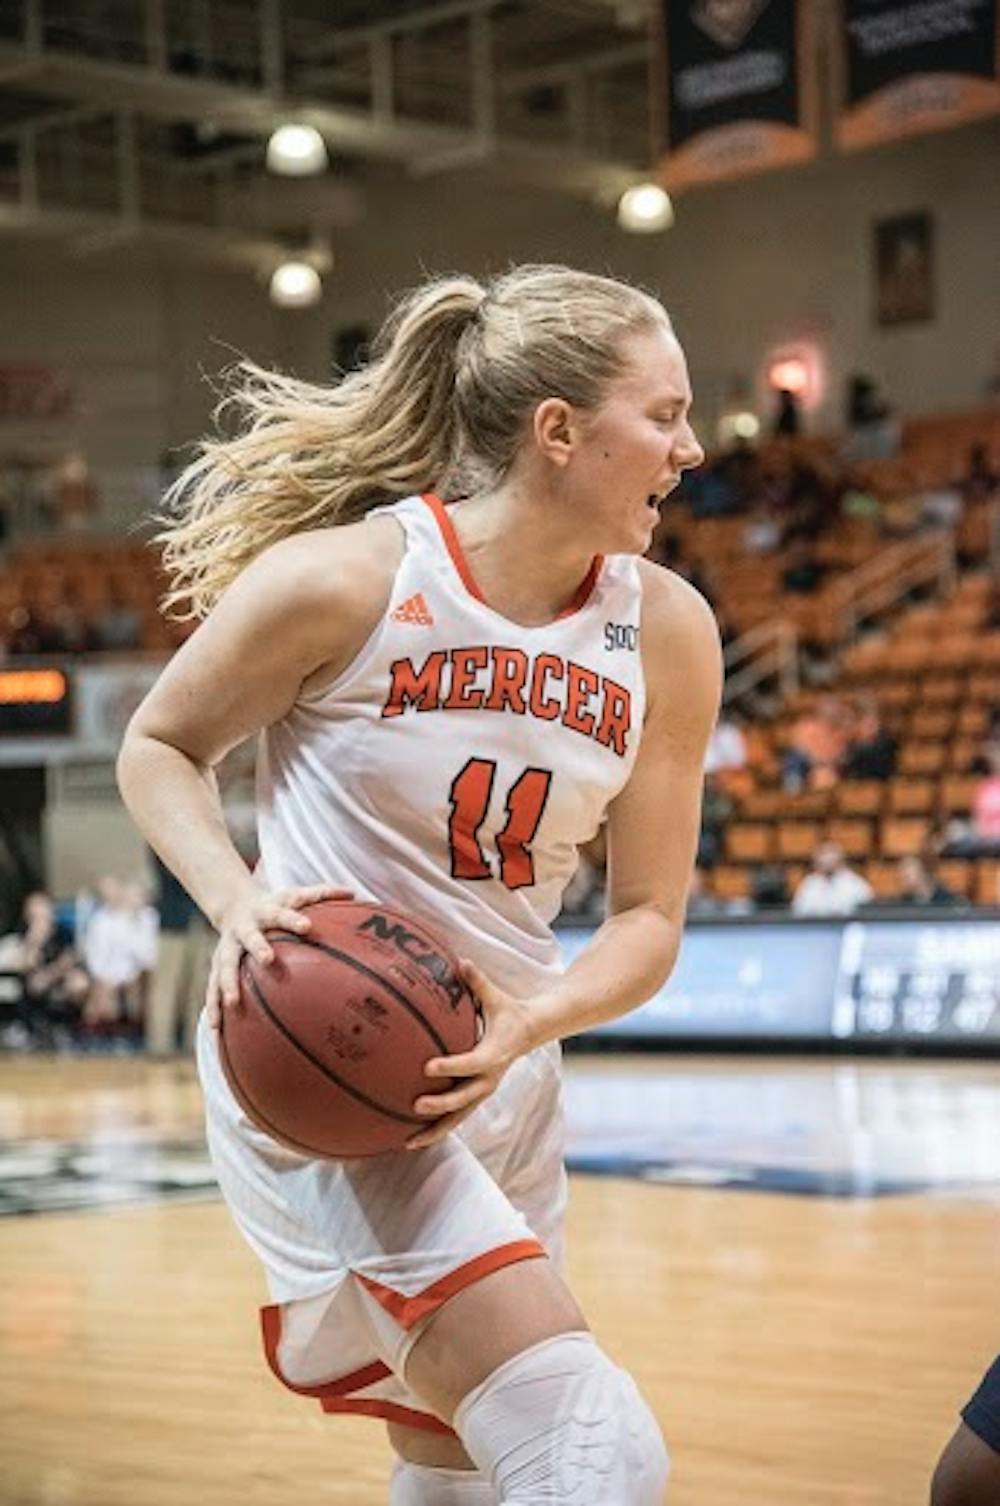 The 6’1 point guard from Sweden came to Mercer in August of last year.